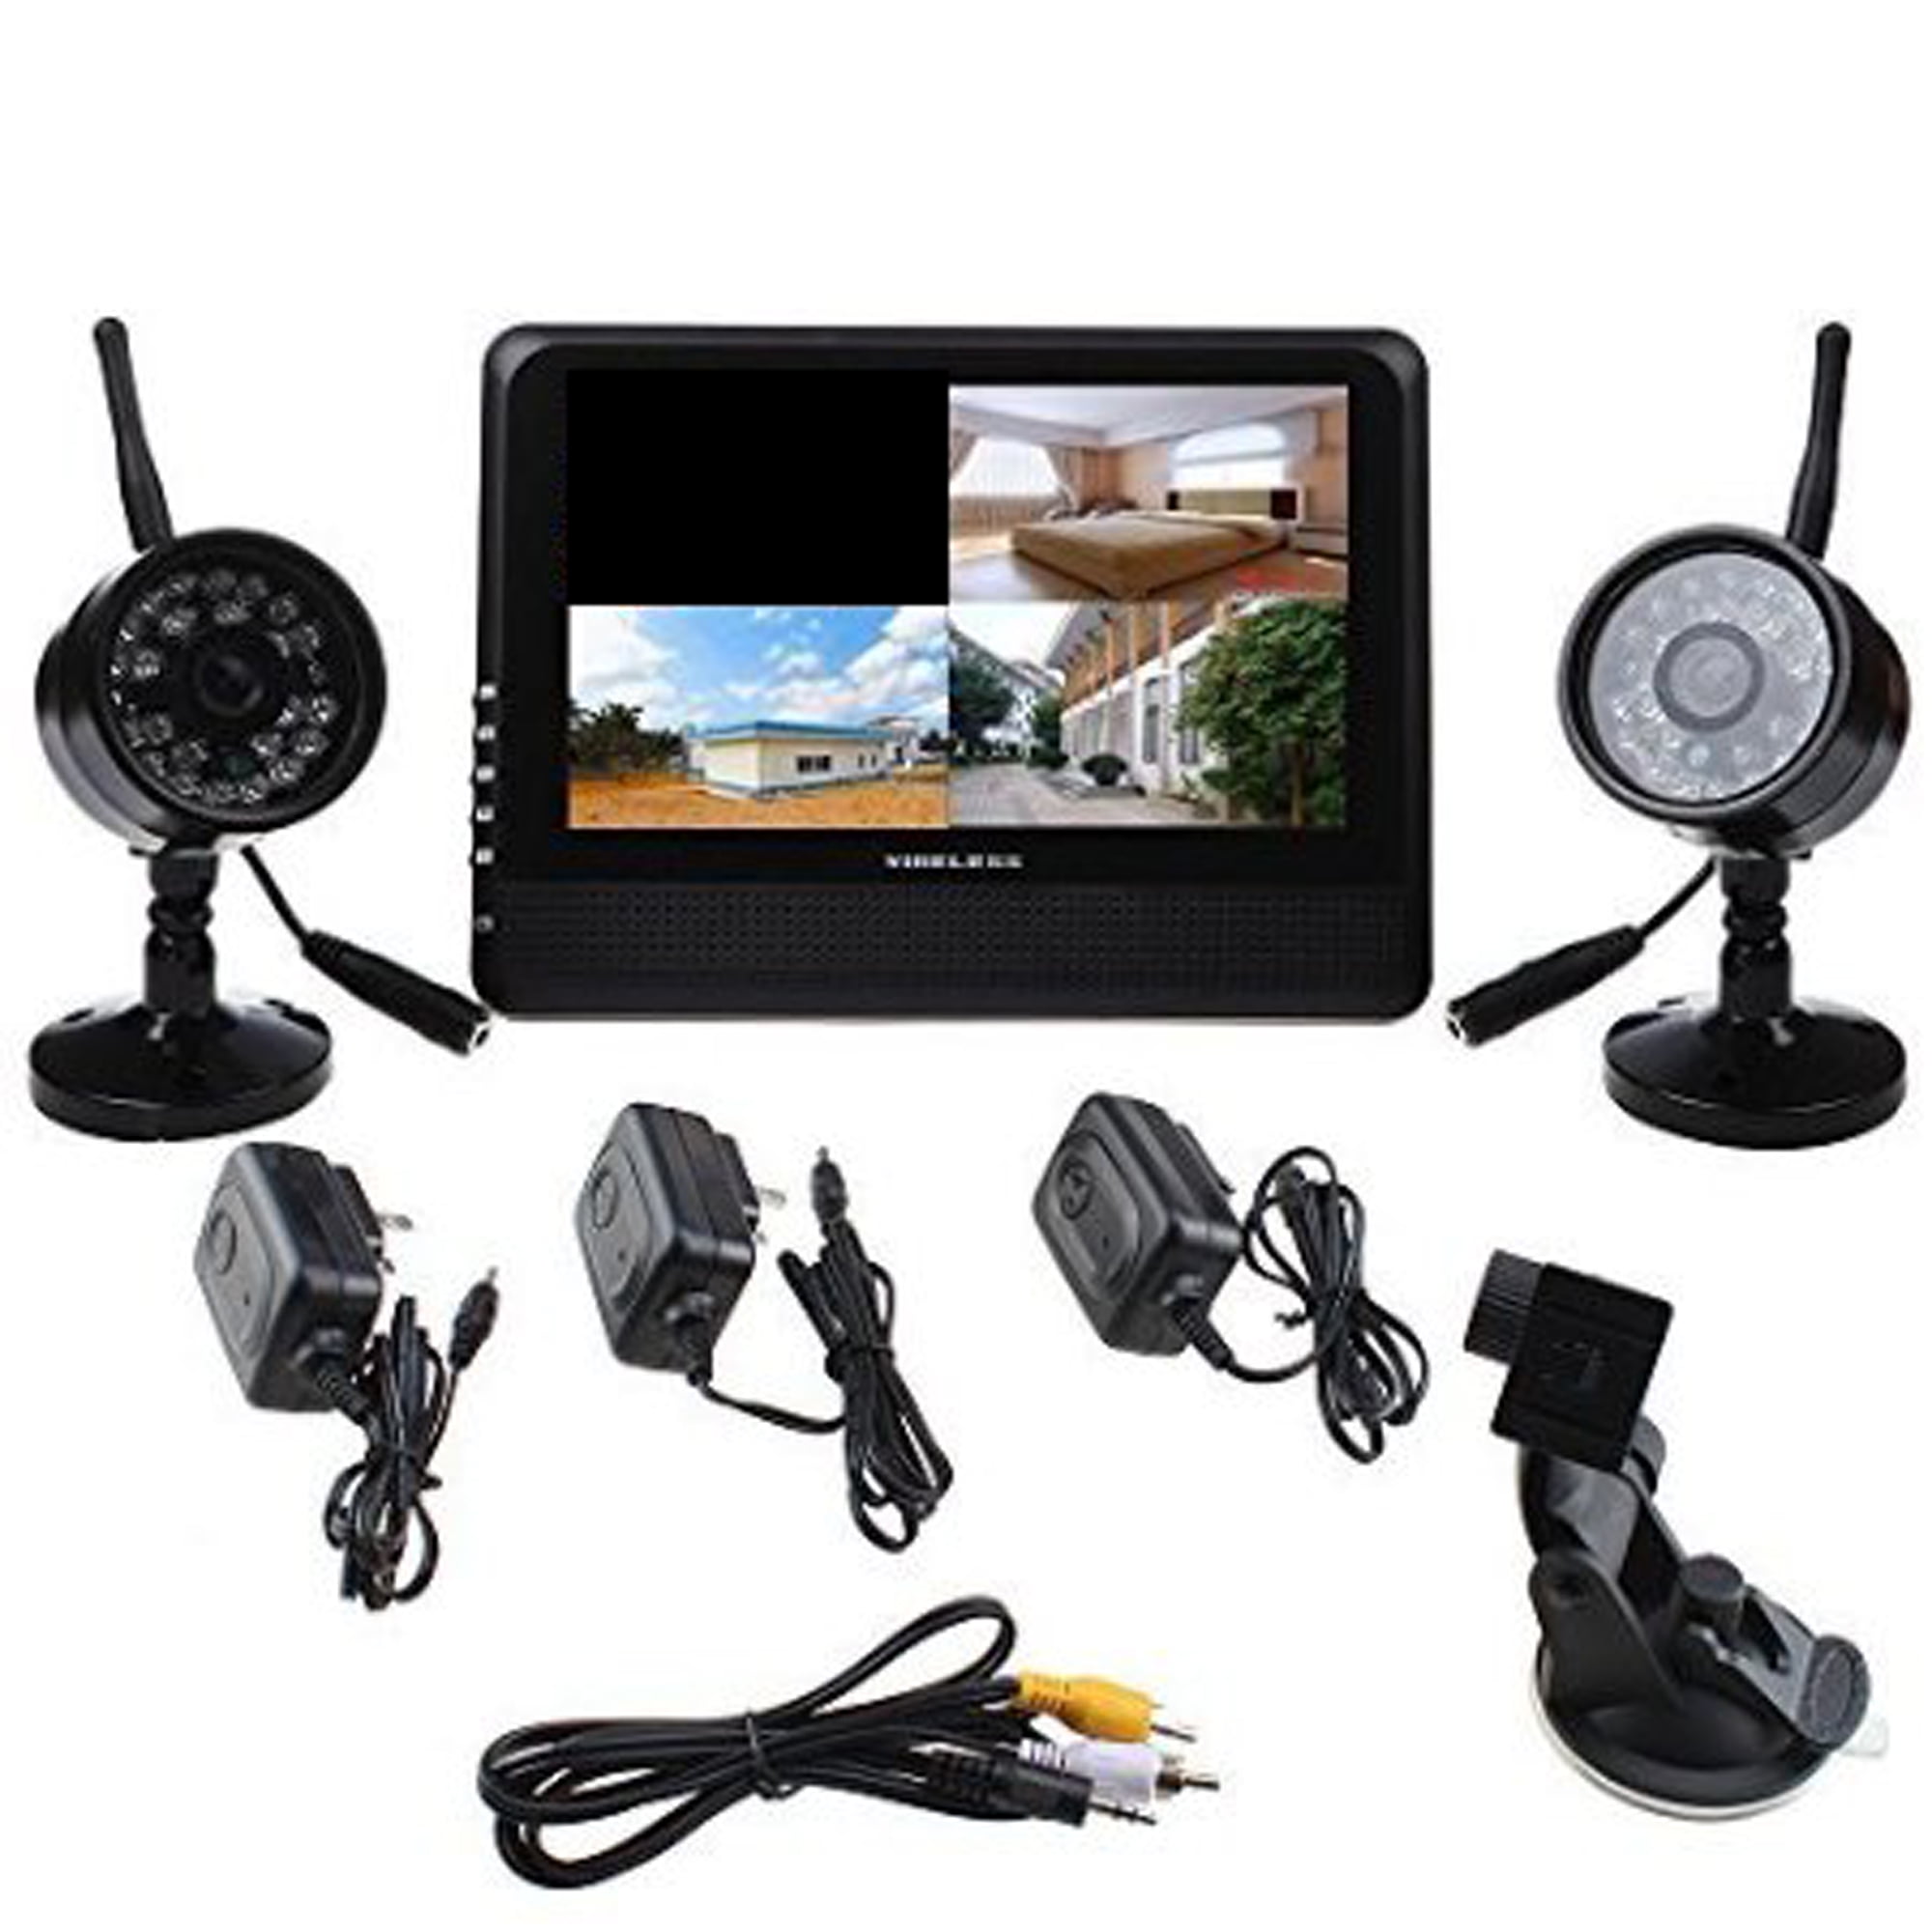 Wireless 4CH Quad DVR 3 Cameras with 7" TFTLCD Monitor Home Security System